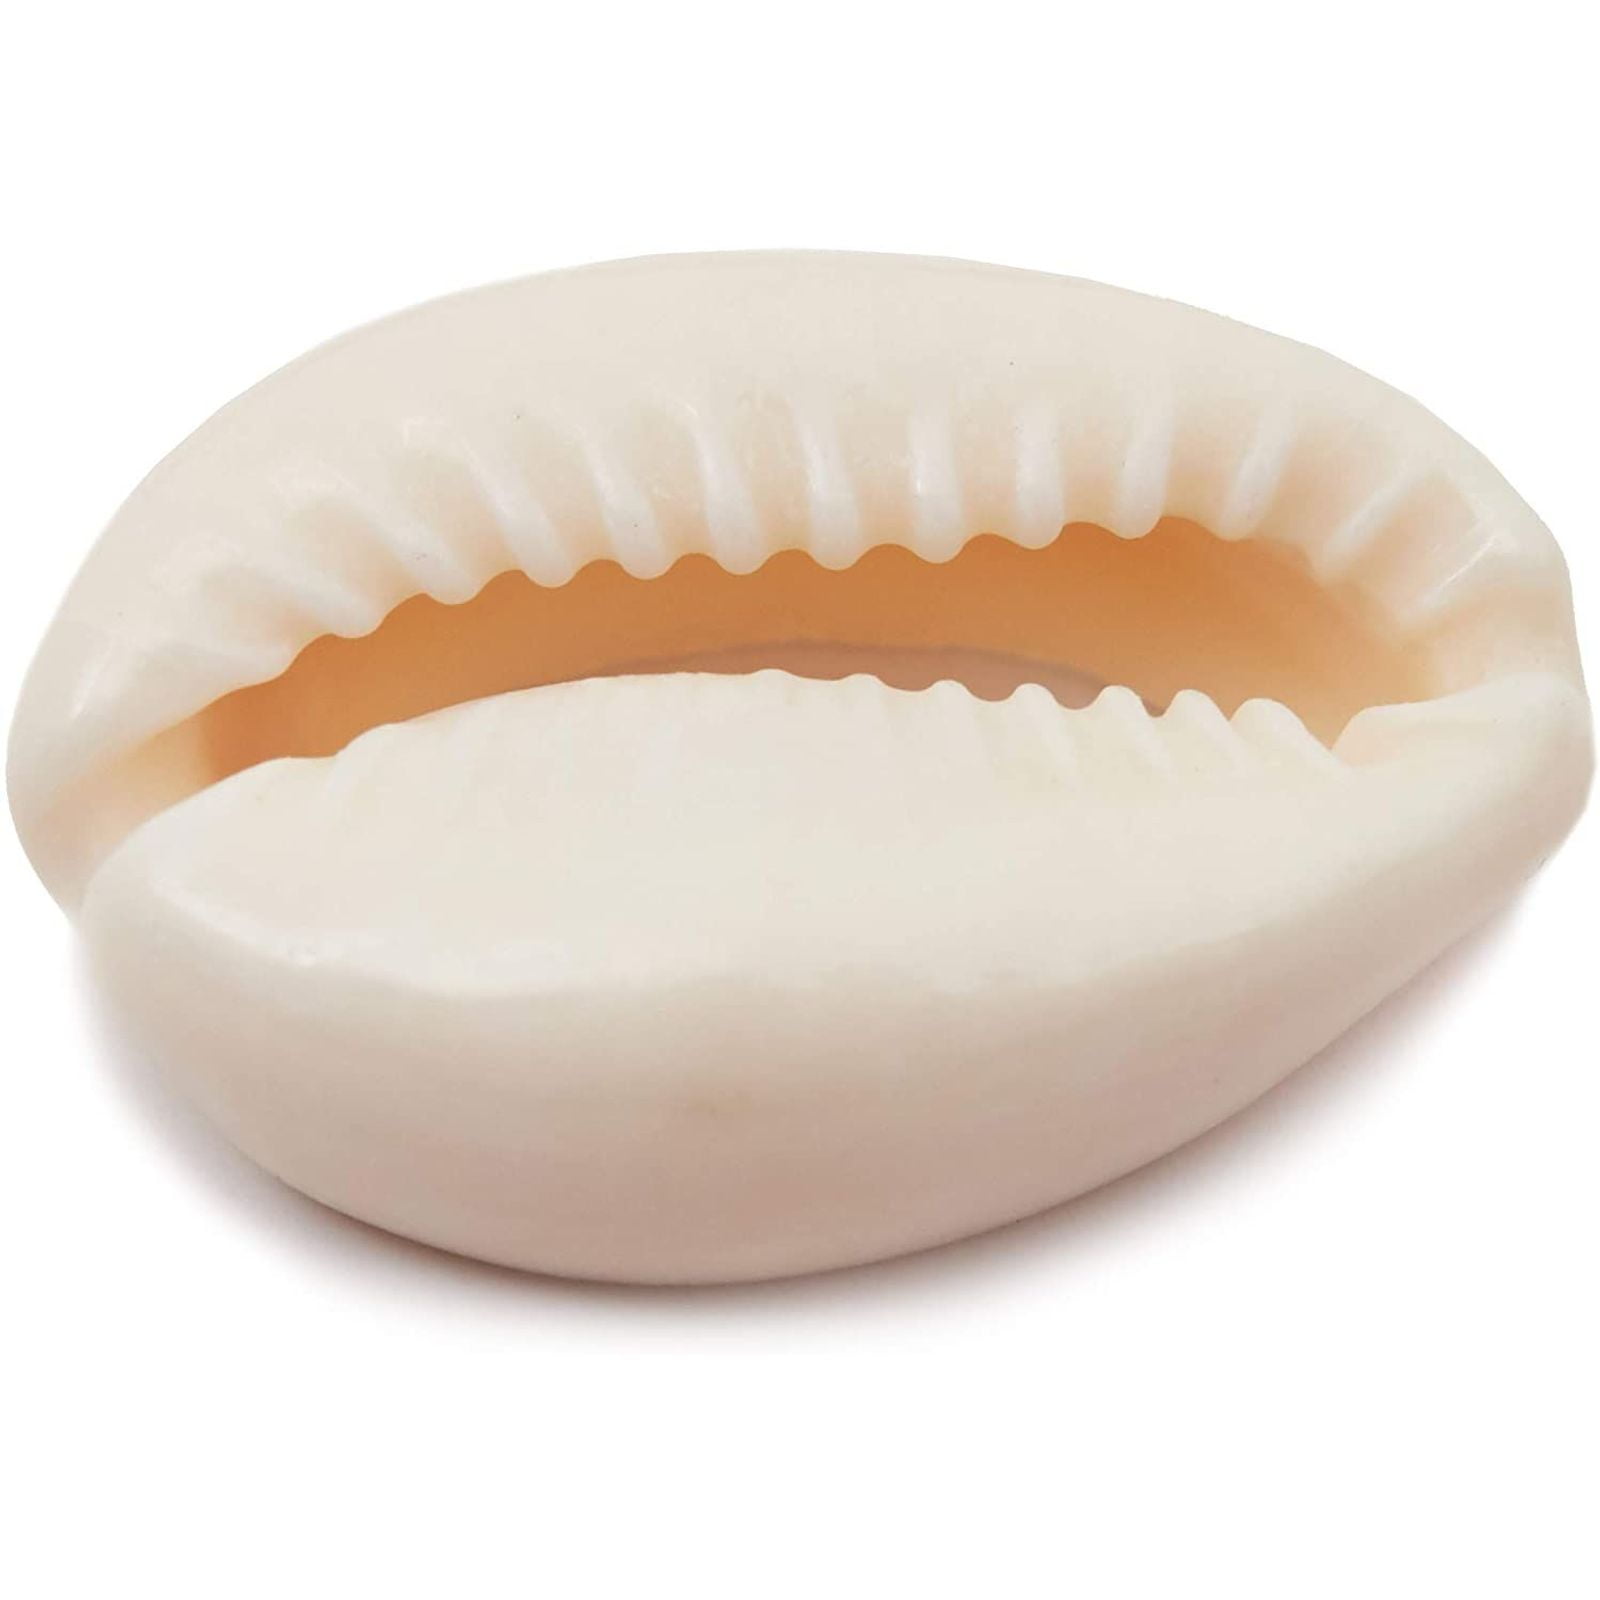 150 Count DIY Crafts Juvale Cowrie Sea Shells for Jewelry Making 